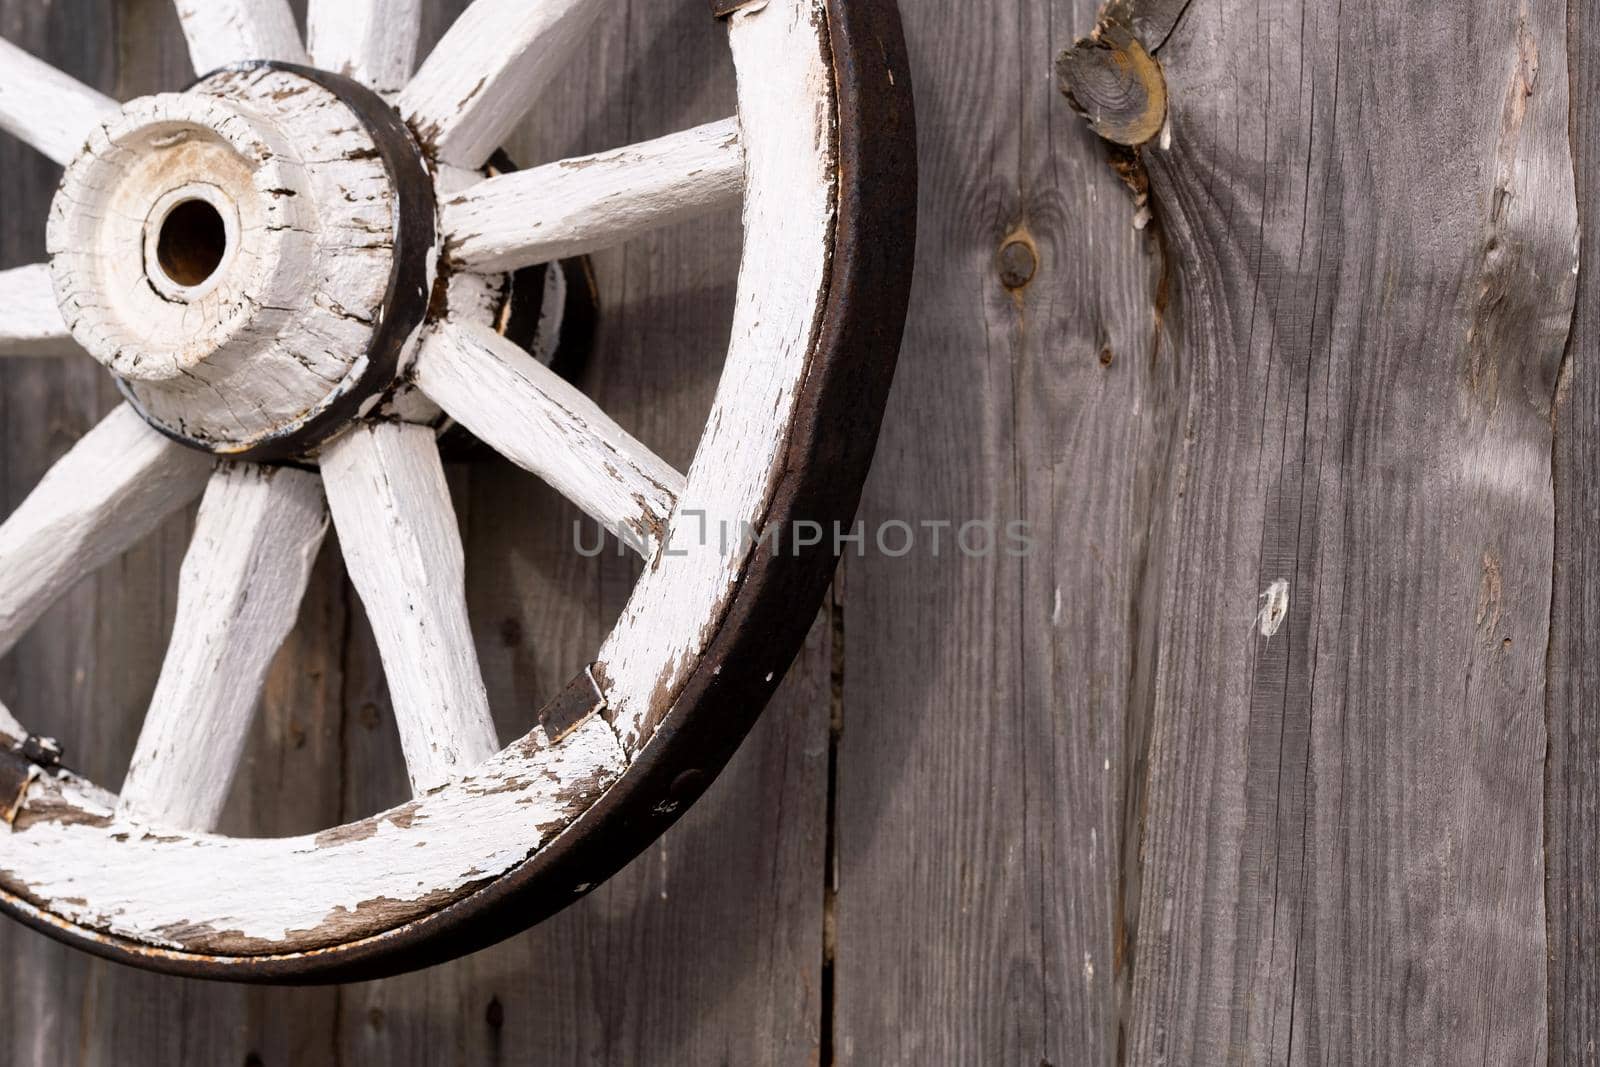 An old wooden carriage wheel hanging on the barn wall.